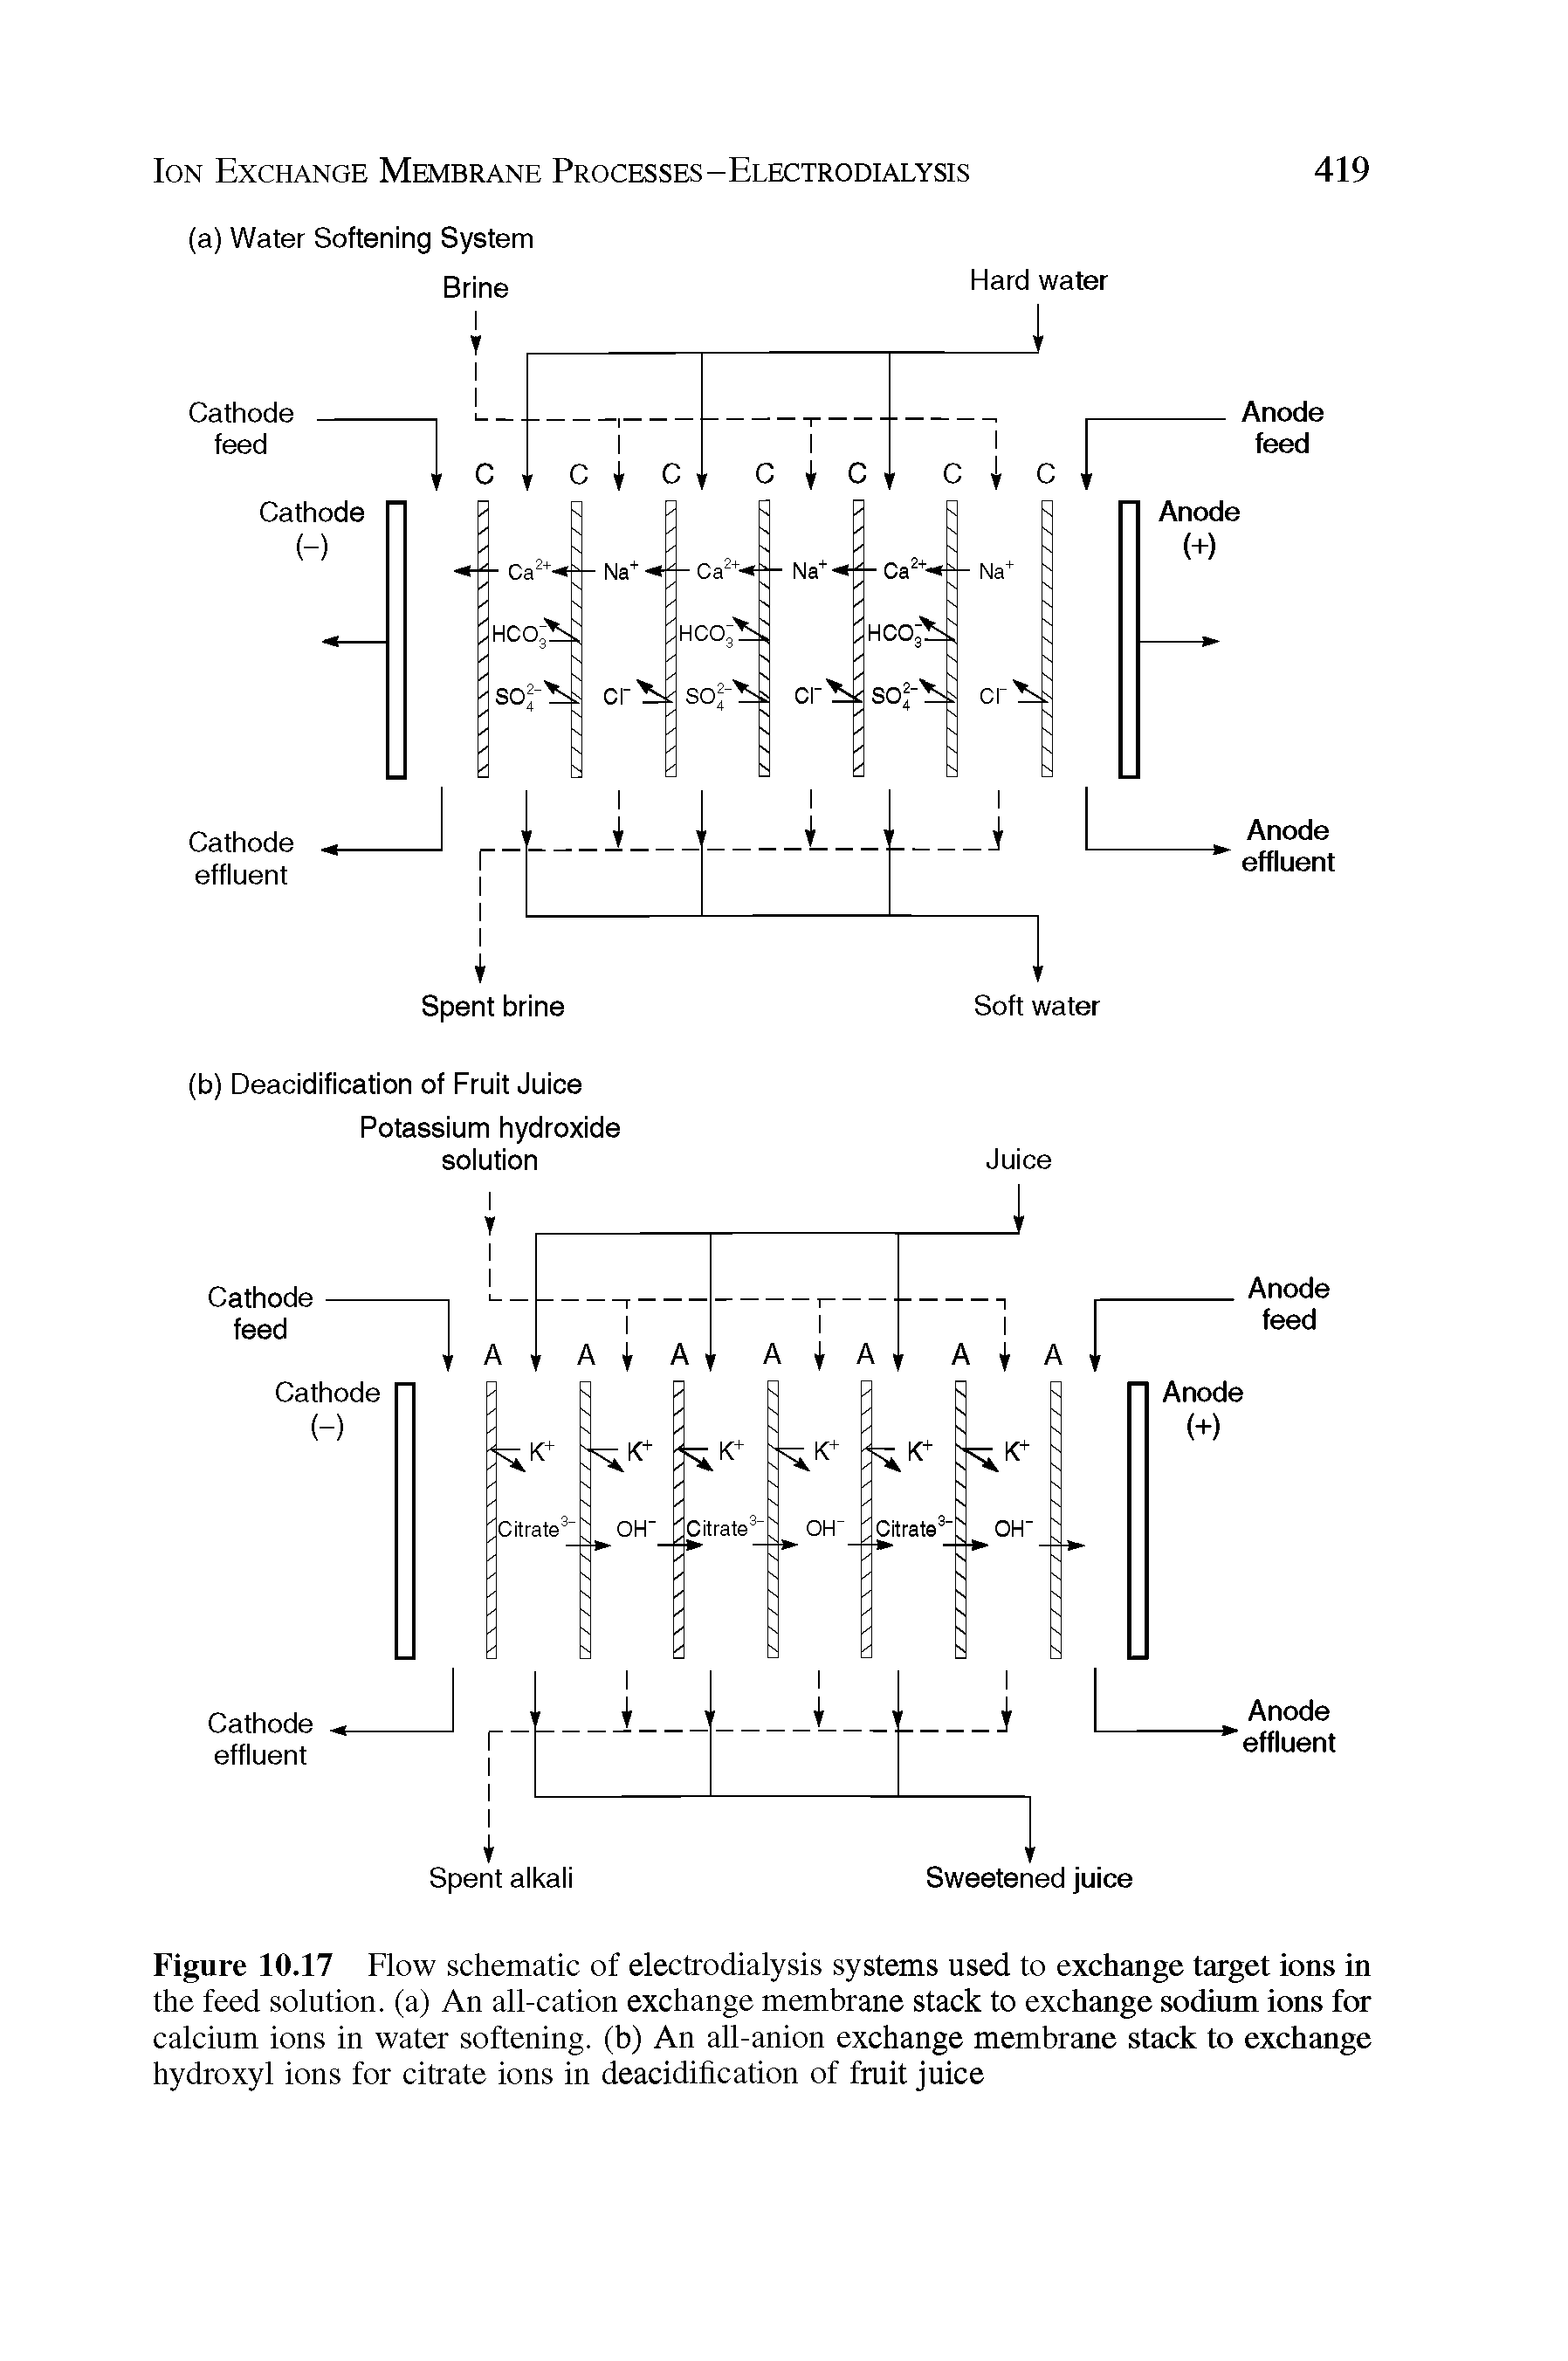 Figure 10.17 Flow schematic of electrodialysis systems used to exchange target ions in the feed solution, (a) An all-cation exchange membrane stack to exchange sodium ions for calcium ions in water softening, (b) An all-anion exchange membrane stack to exchange hydroxyl ions for citrate ions in deacidification of fruit juice...